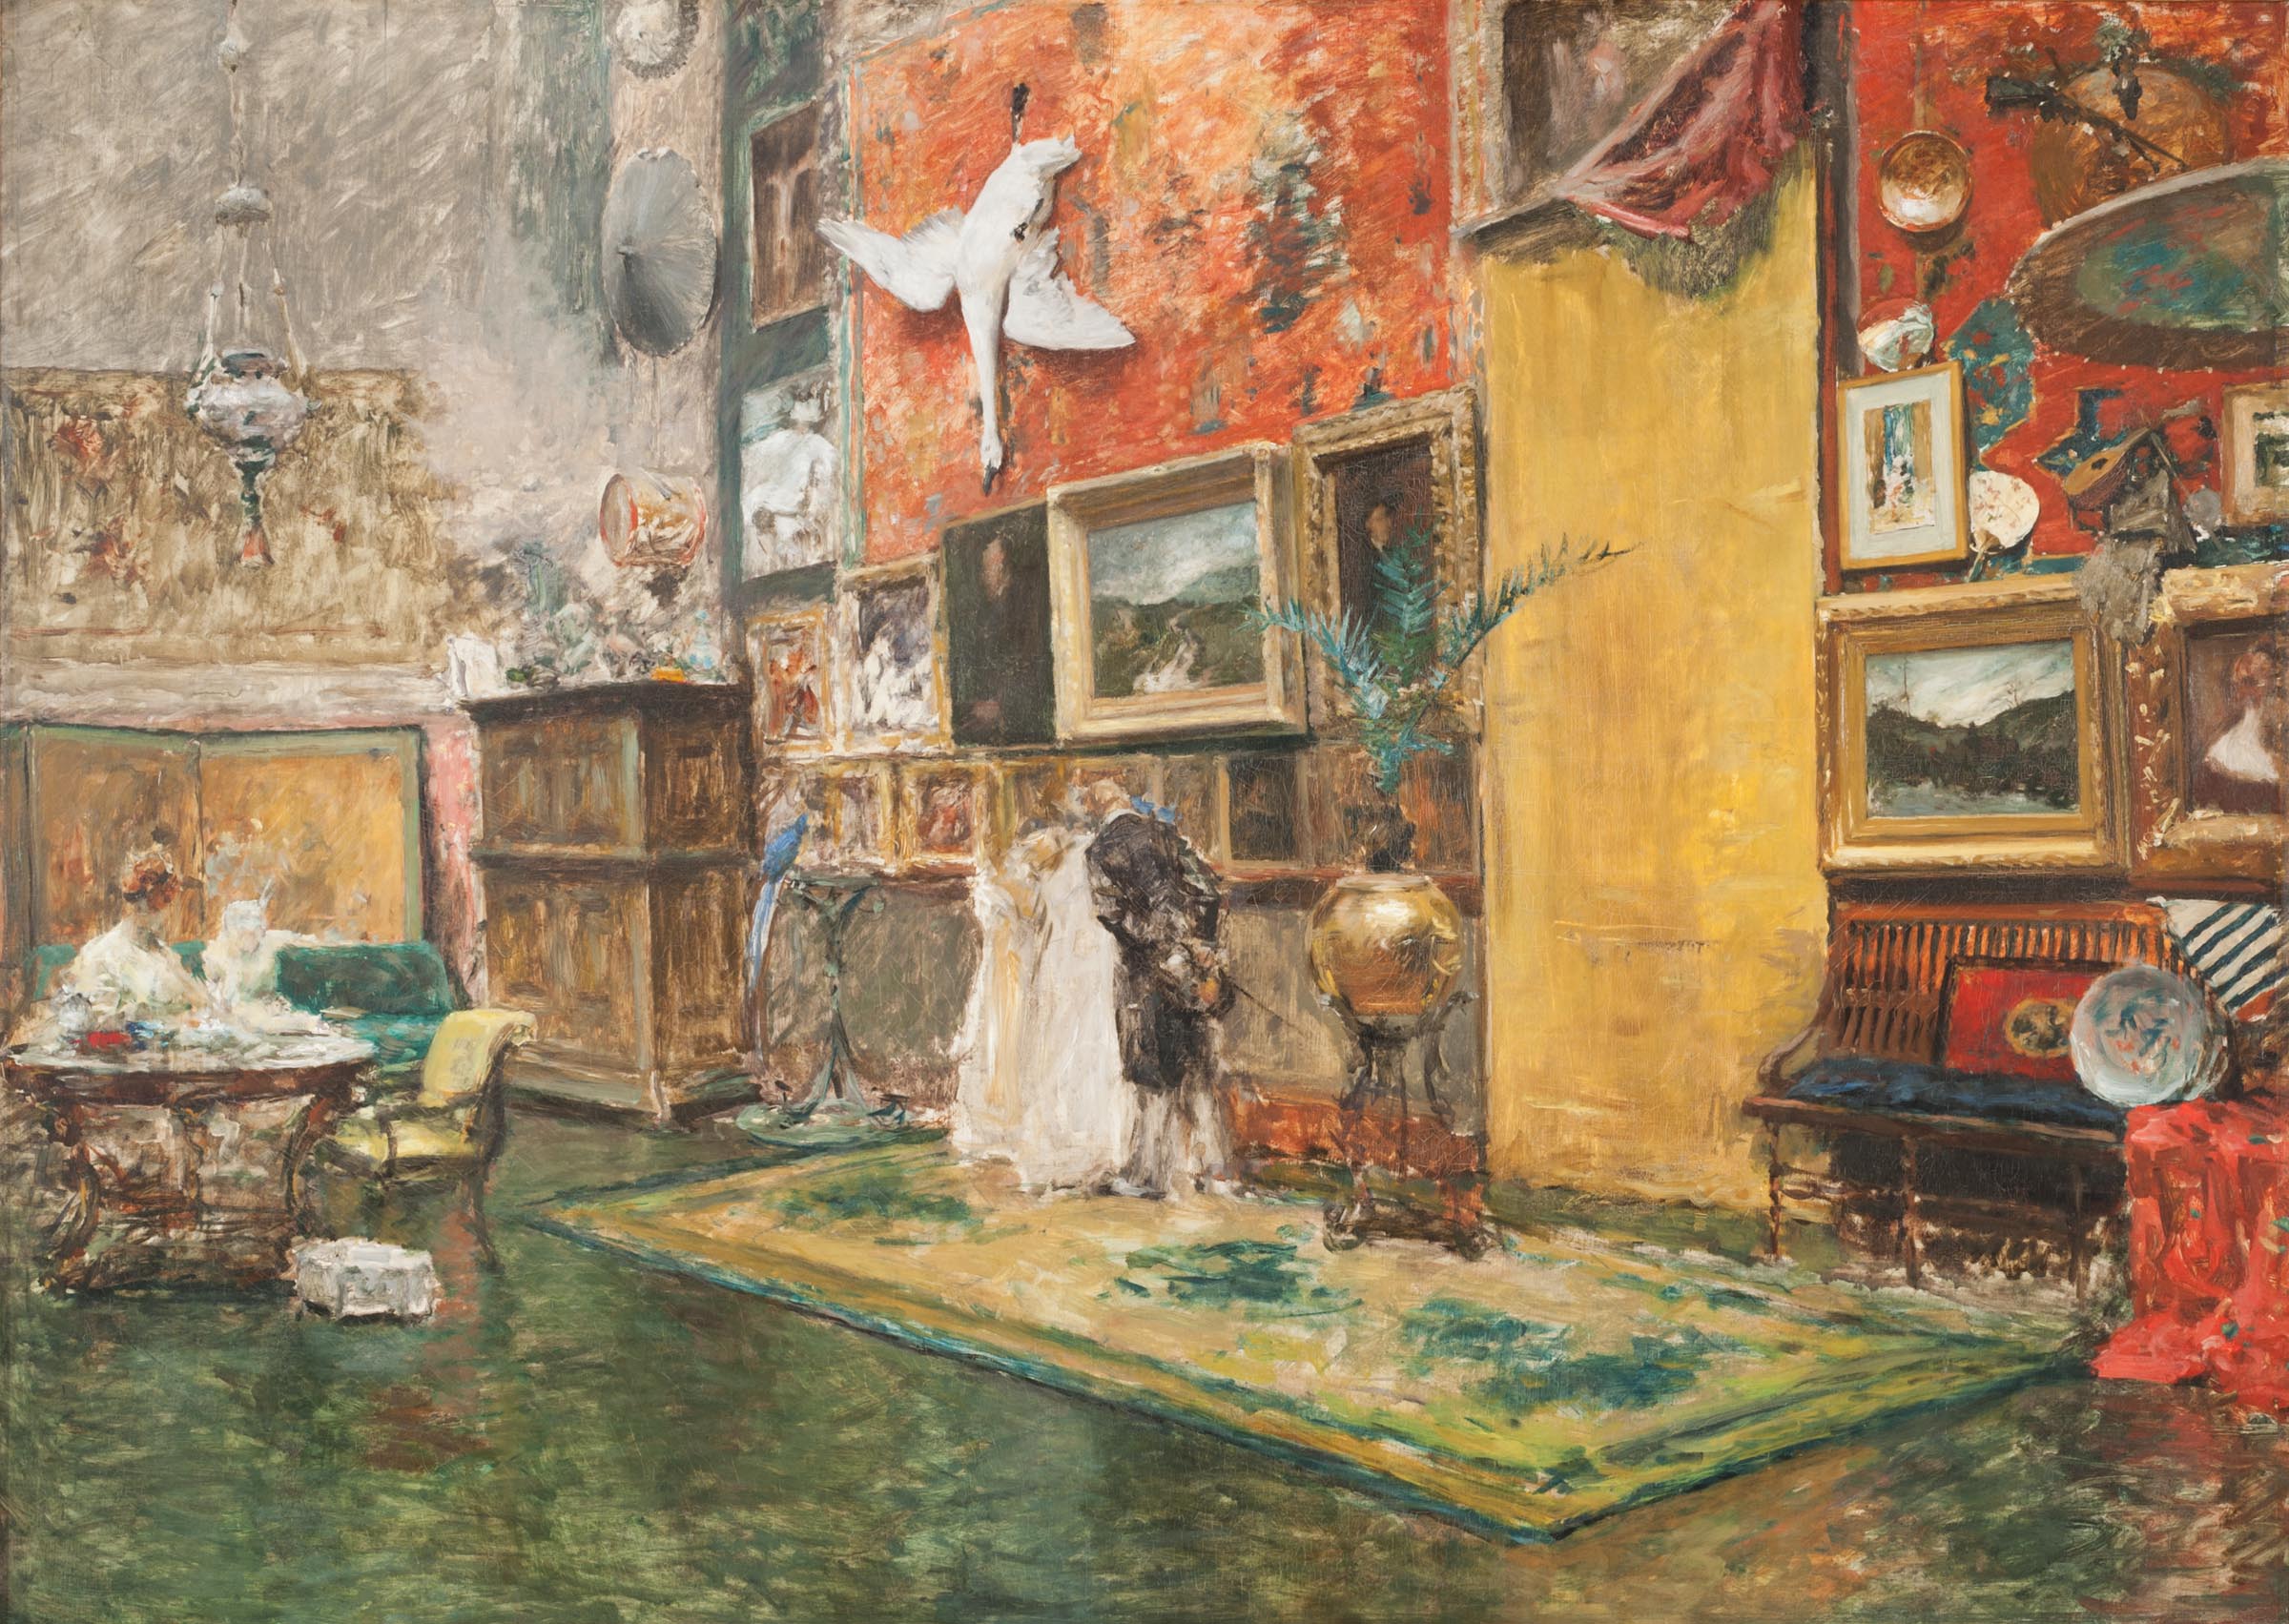 William Merritt Chase, (American, 1849–1916), Tenth Street Studio a painting of a room filled with various taxidermied animals